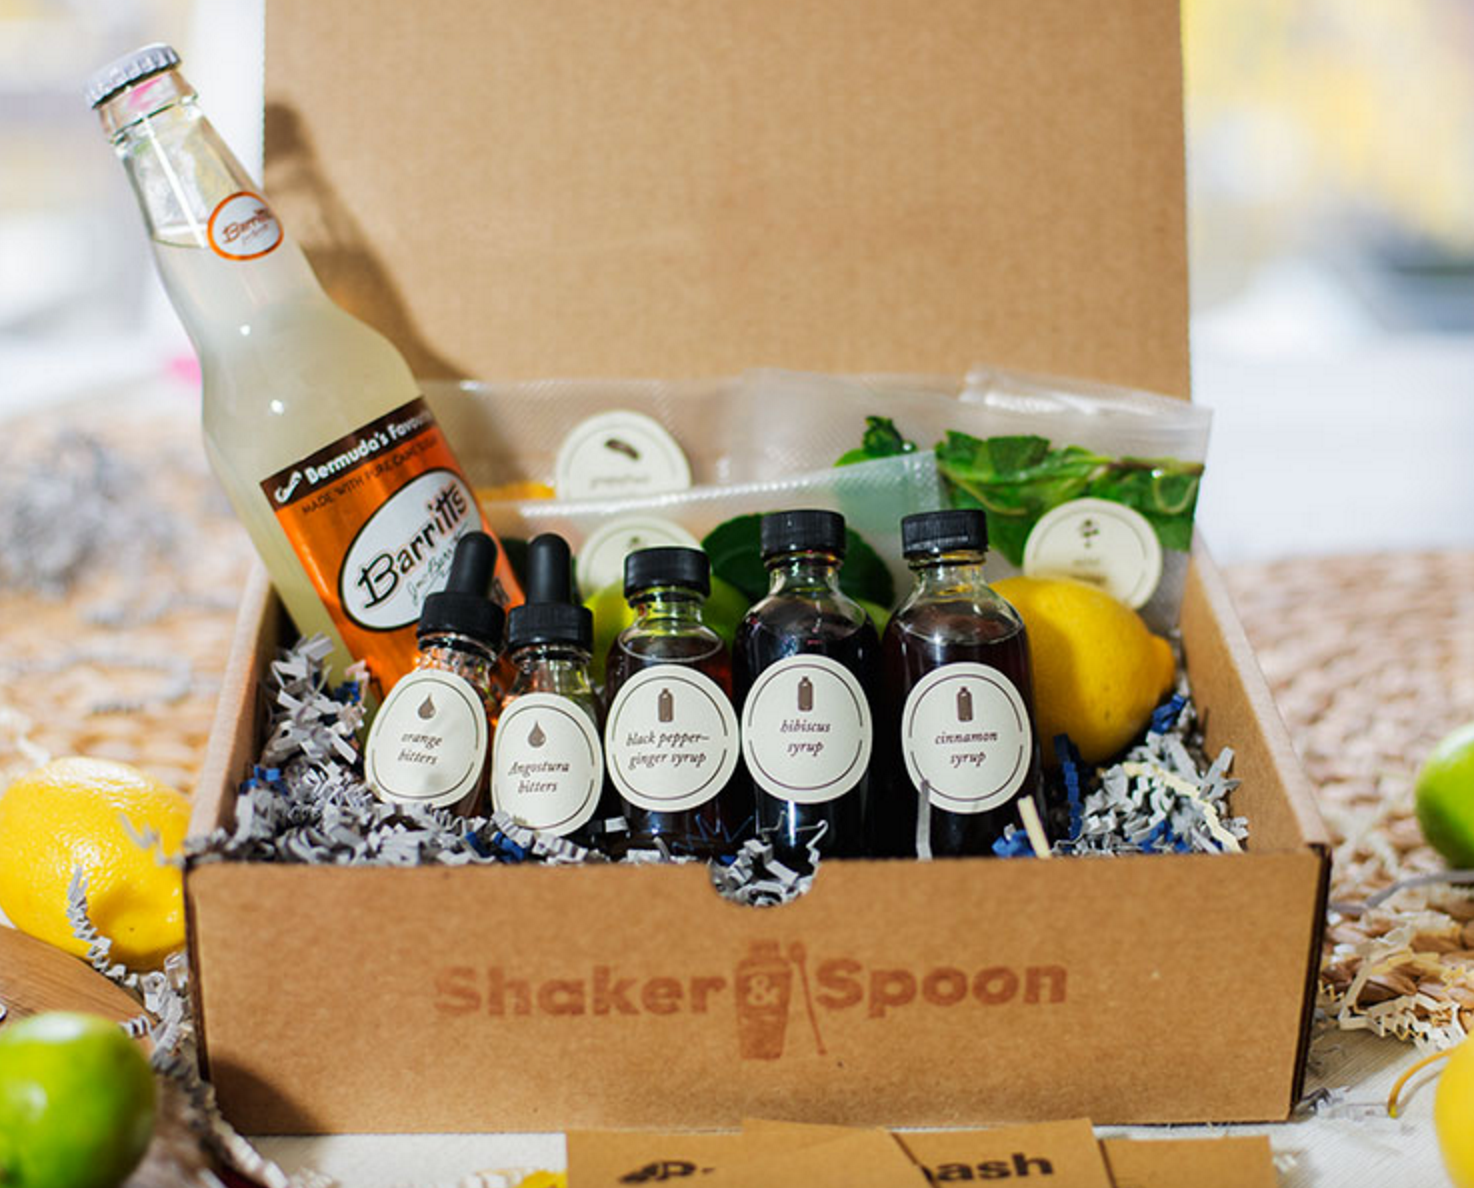 Shaker & Spoon Cyber Monday Deal – 25% Off First Box